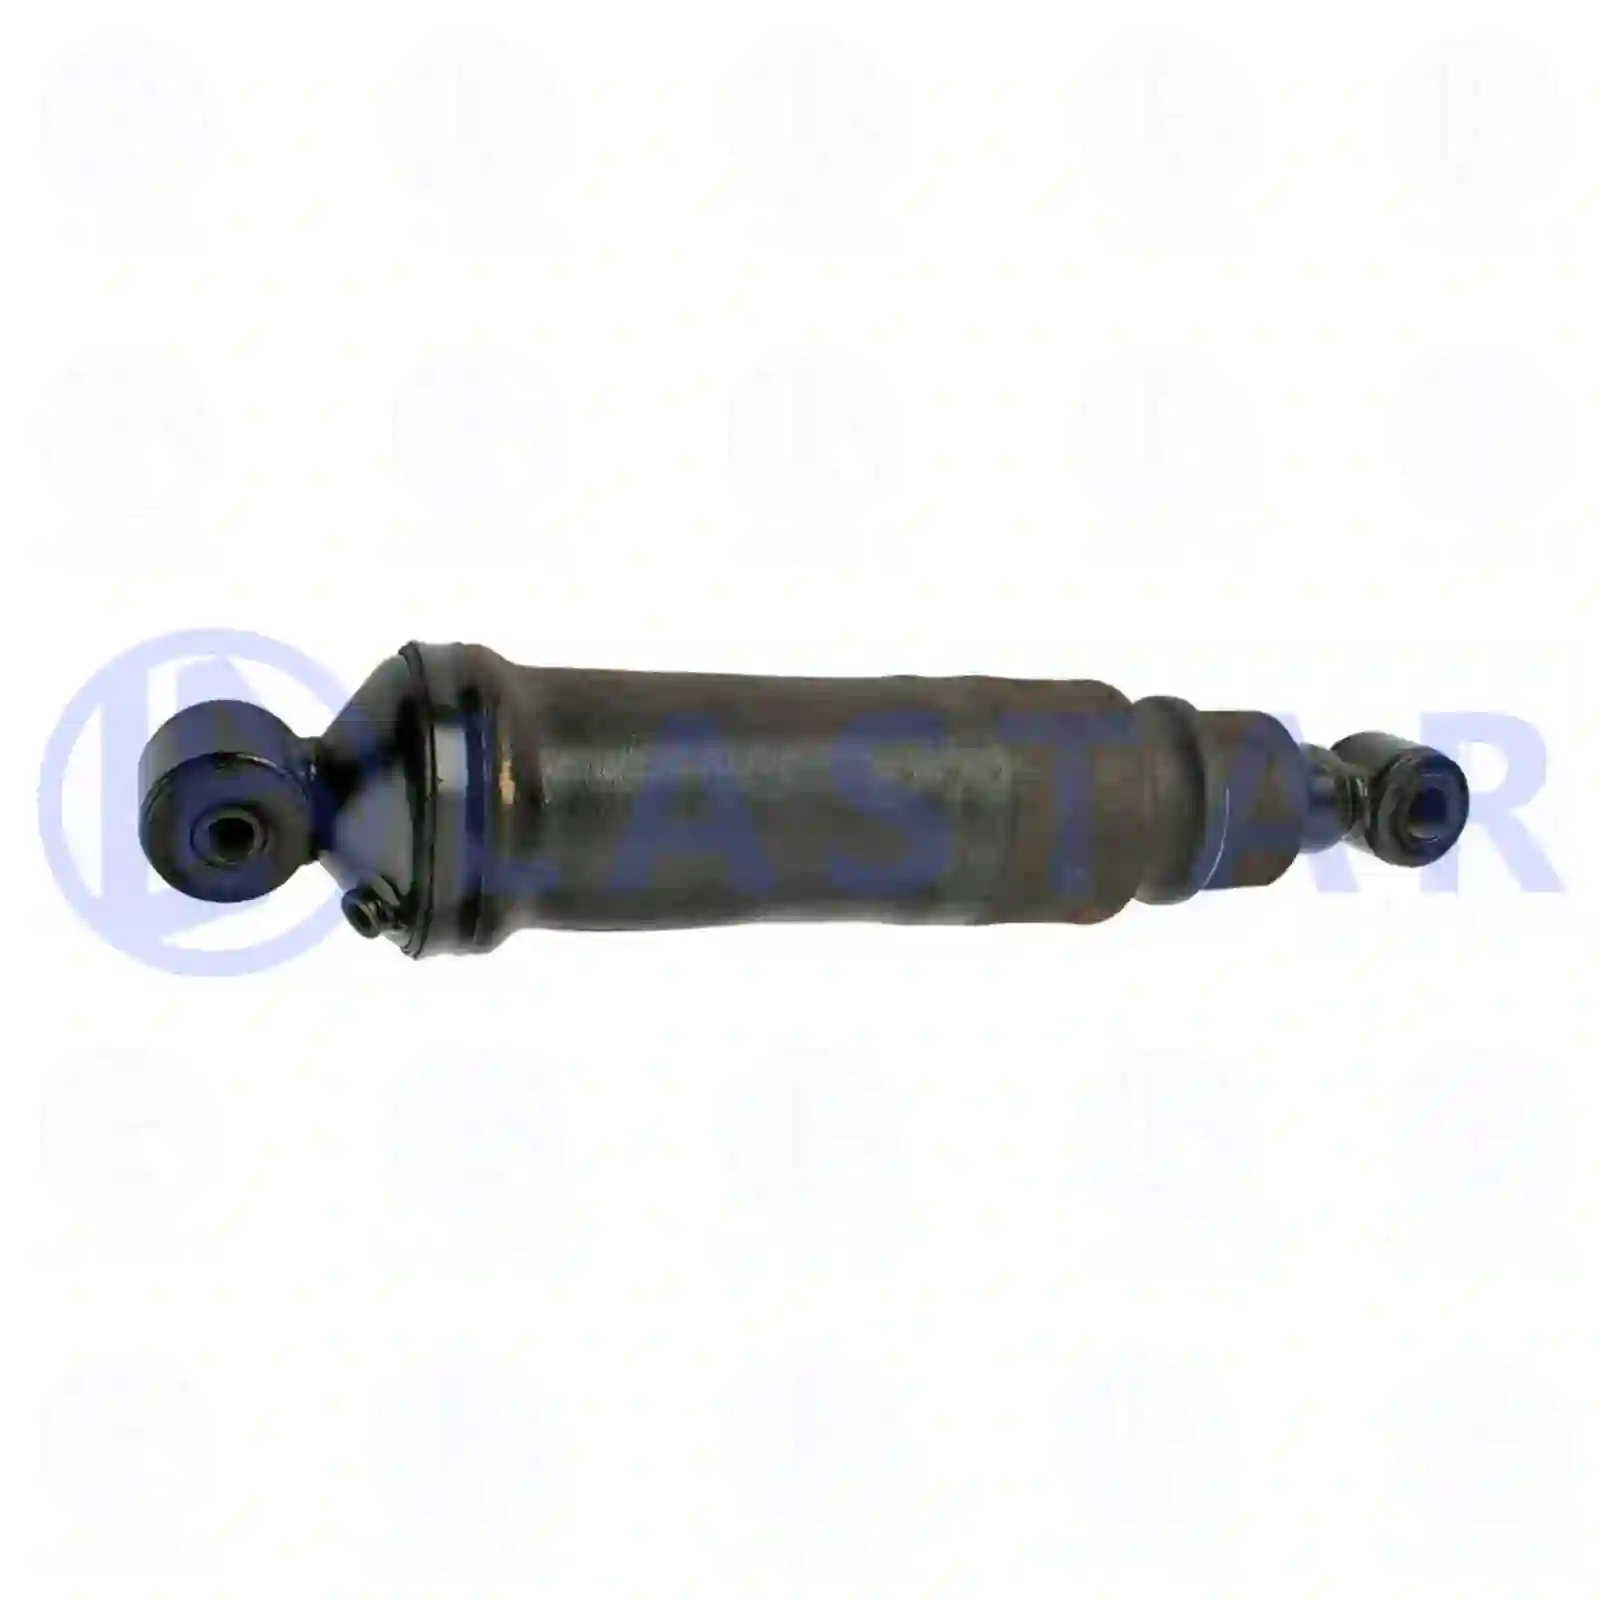 Cabin shock absorber, with air bellow, 77734731, 1629719, 1629724, 3172984, , , ||  77734731 Lastar Spare Part | Truck Spare Parts, Auotomotive Spare Parts Cabin shock absorber, with air bellow, 77734731, 1629719, 1629724, 3172984, , , ||  77734731 Lastar Spare Part | Truck Spare Parts, Auotomotive Spare Parts